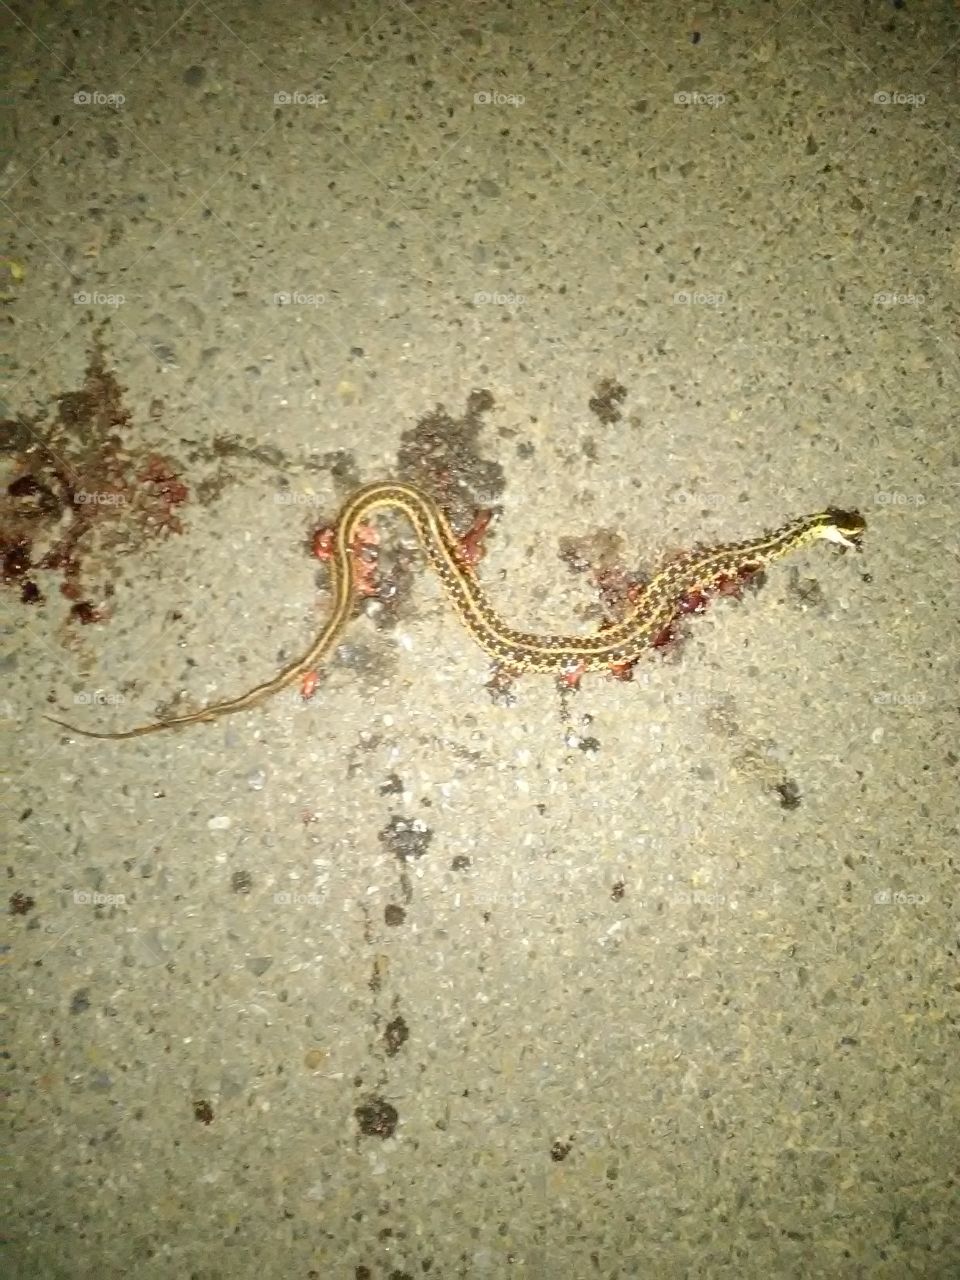 it looks like he was trying to get some heat but the heat got him I'm not sure if anybody can tell me what exactly what kind of snake this is I would be grateful thank